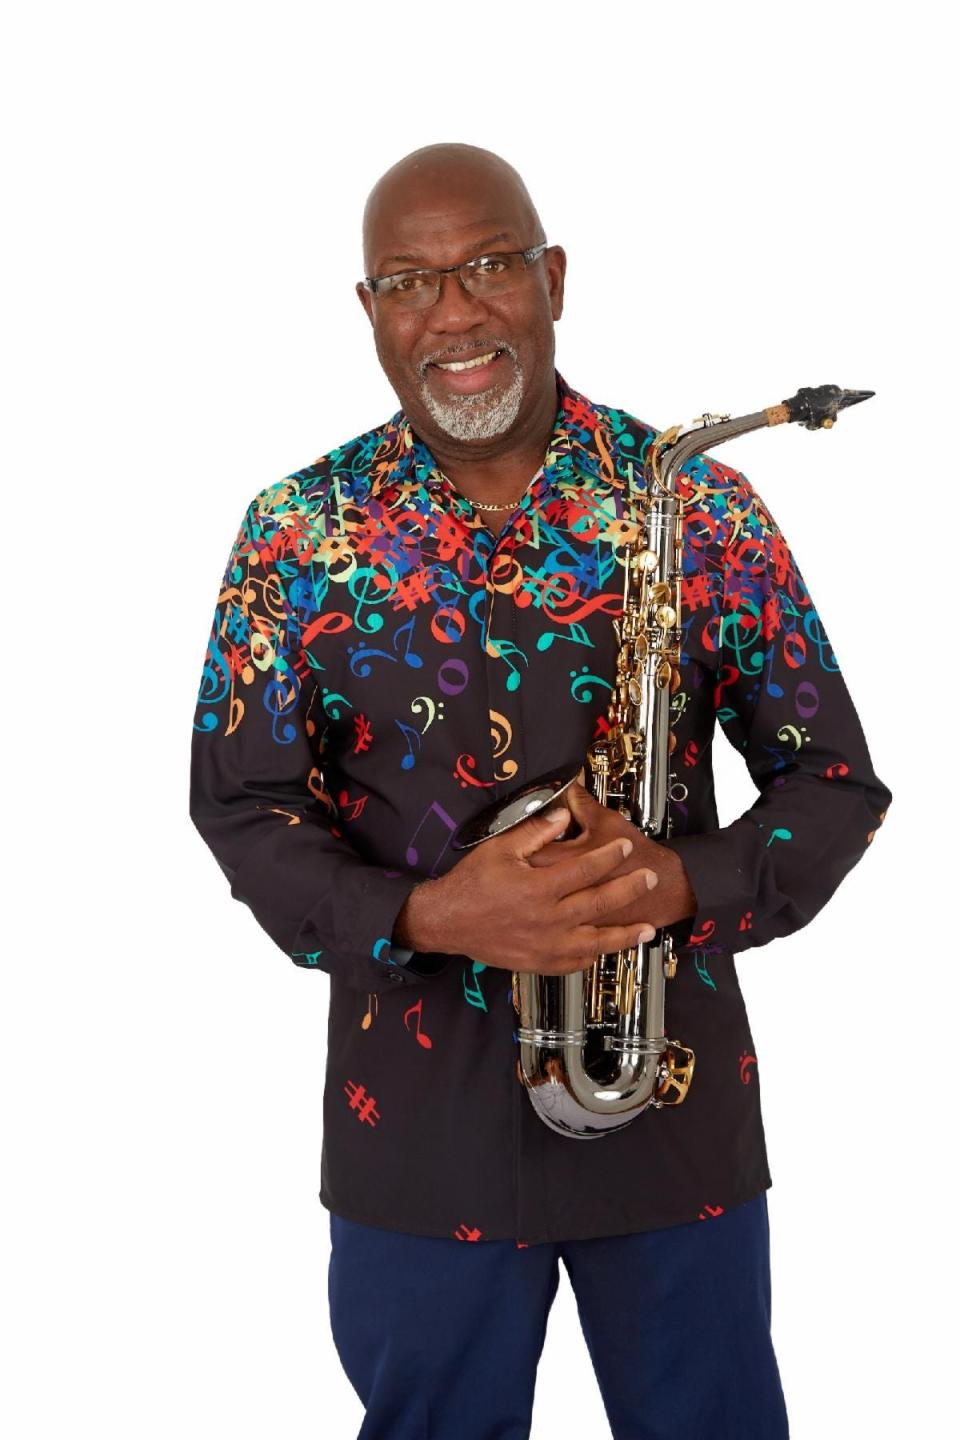 Ed "Sax" Thomas is one of the scheduled performers at the Juneteenth Father's Day Concert at Seasongood Pavilion at Eden Park, on Sunday, June 18.